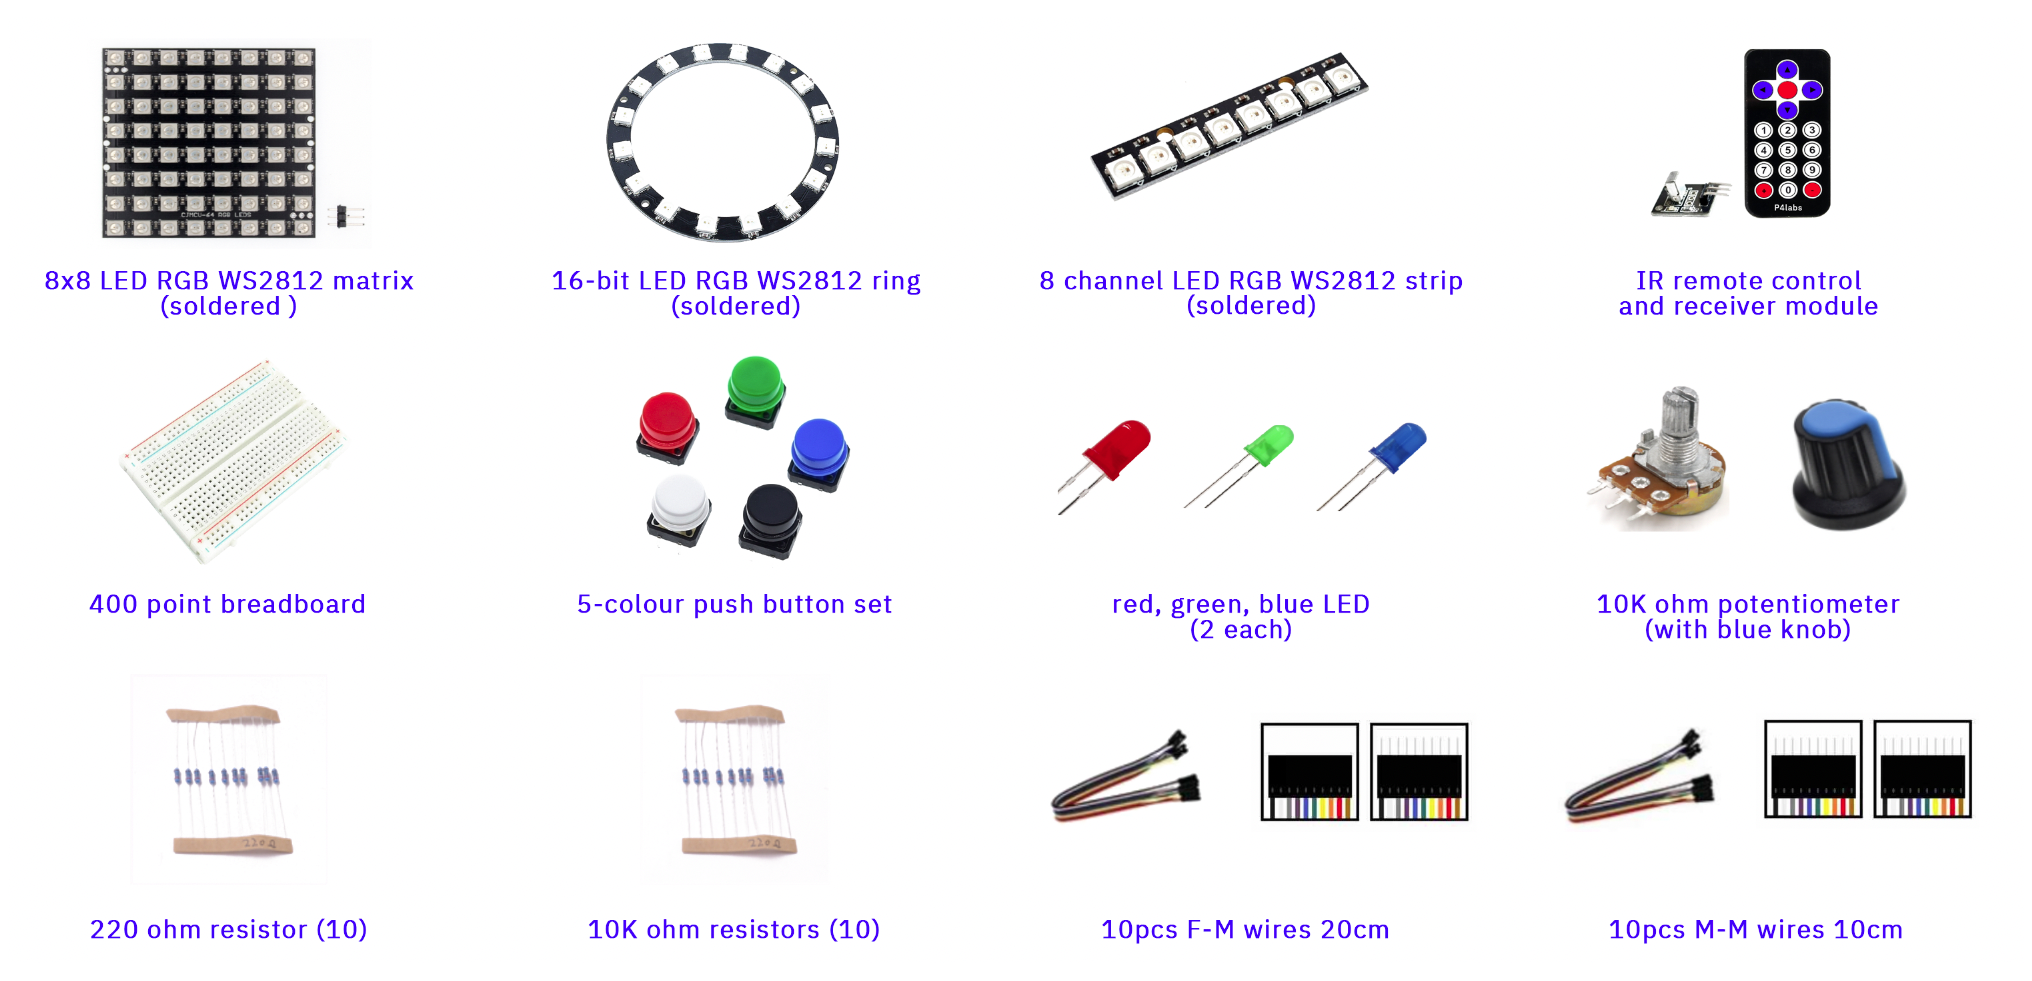 LED kit components. Comes with P4Uno board and extra wires.